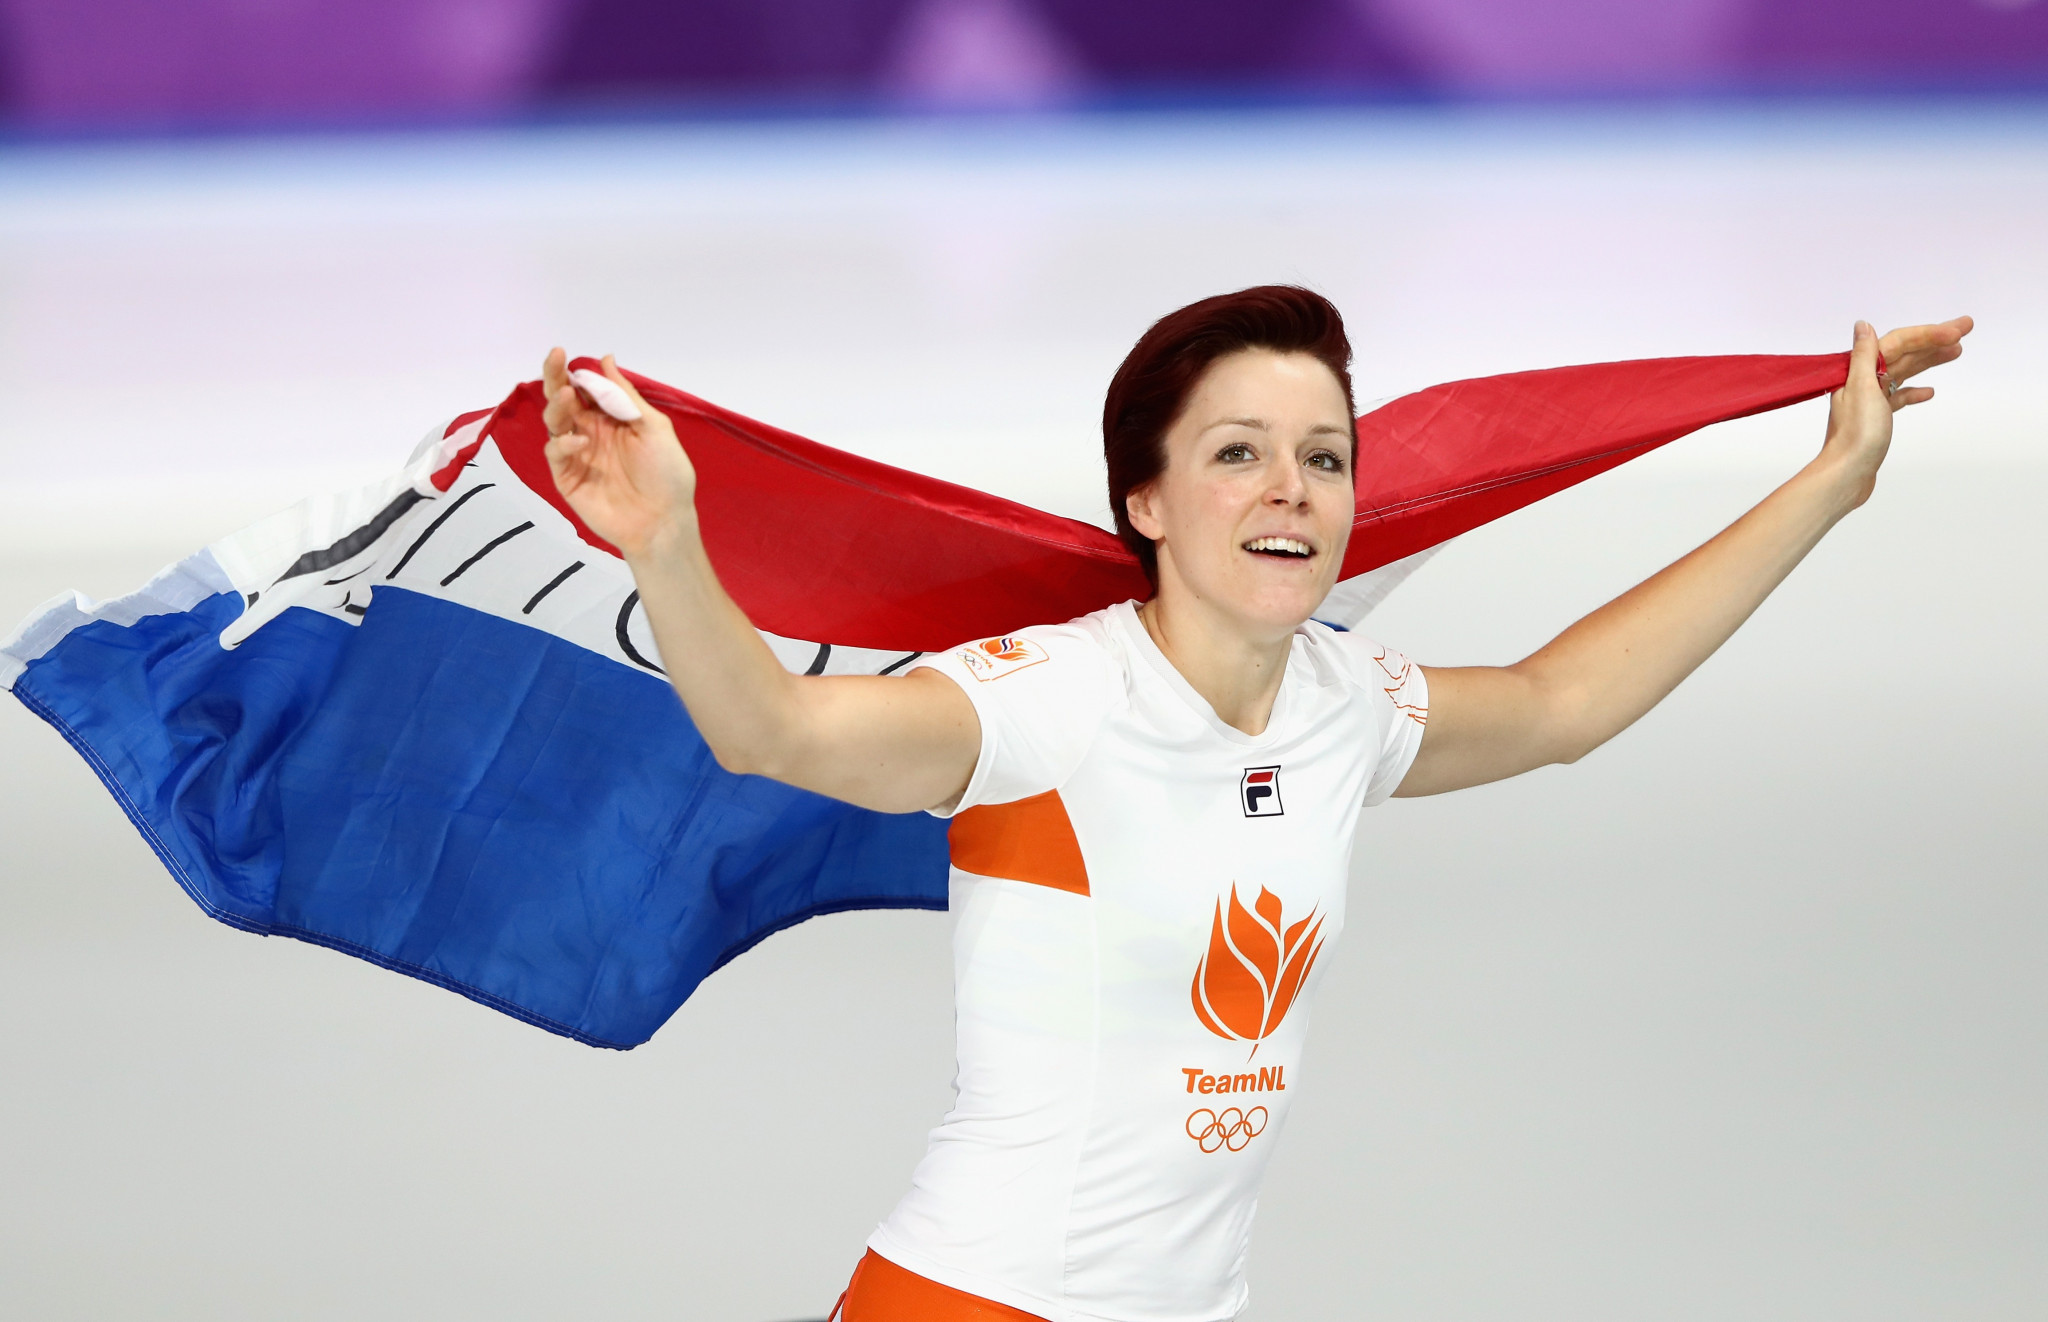 The Netherlands' Ter Mors breaks Olympic record to claim women's 1,000m speed skating gold at Pyeongchang 2018